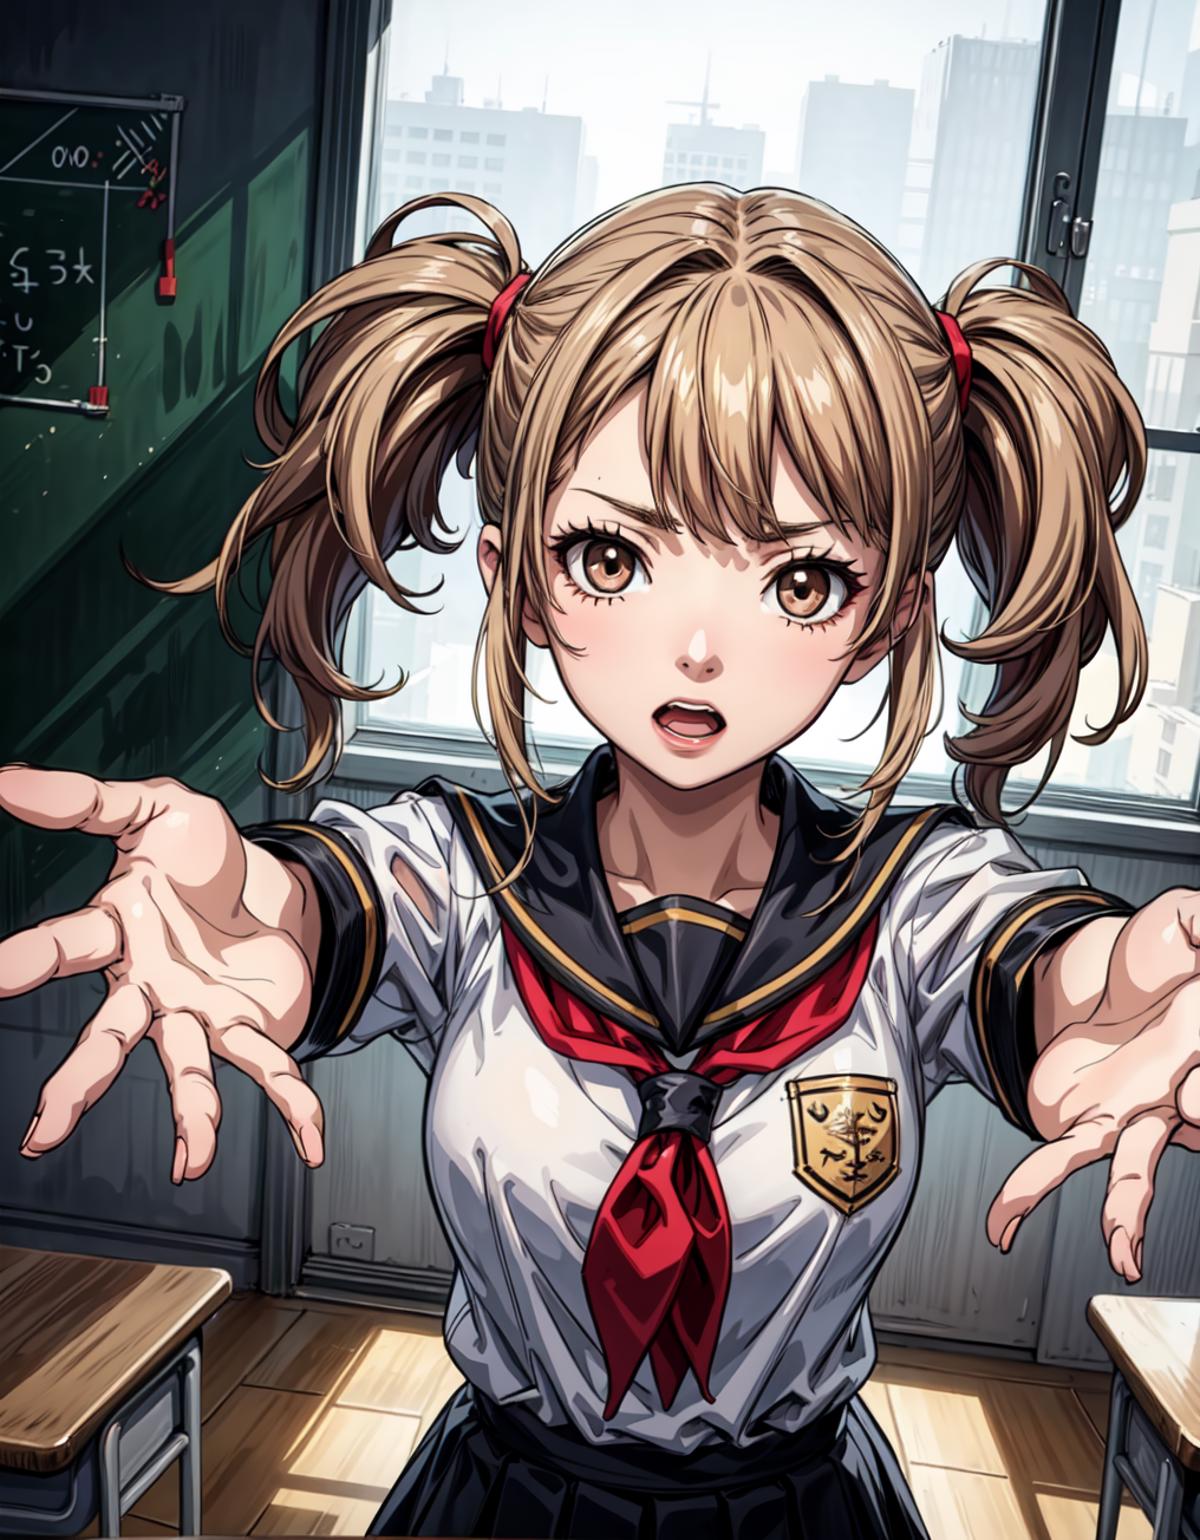 A girl with pigtails wearing a sailor shirt and a red tie with an emblem on the front.